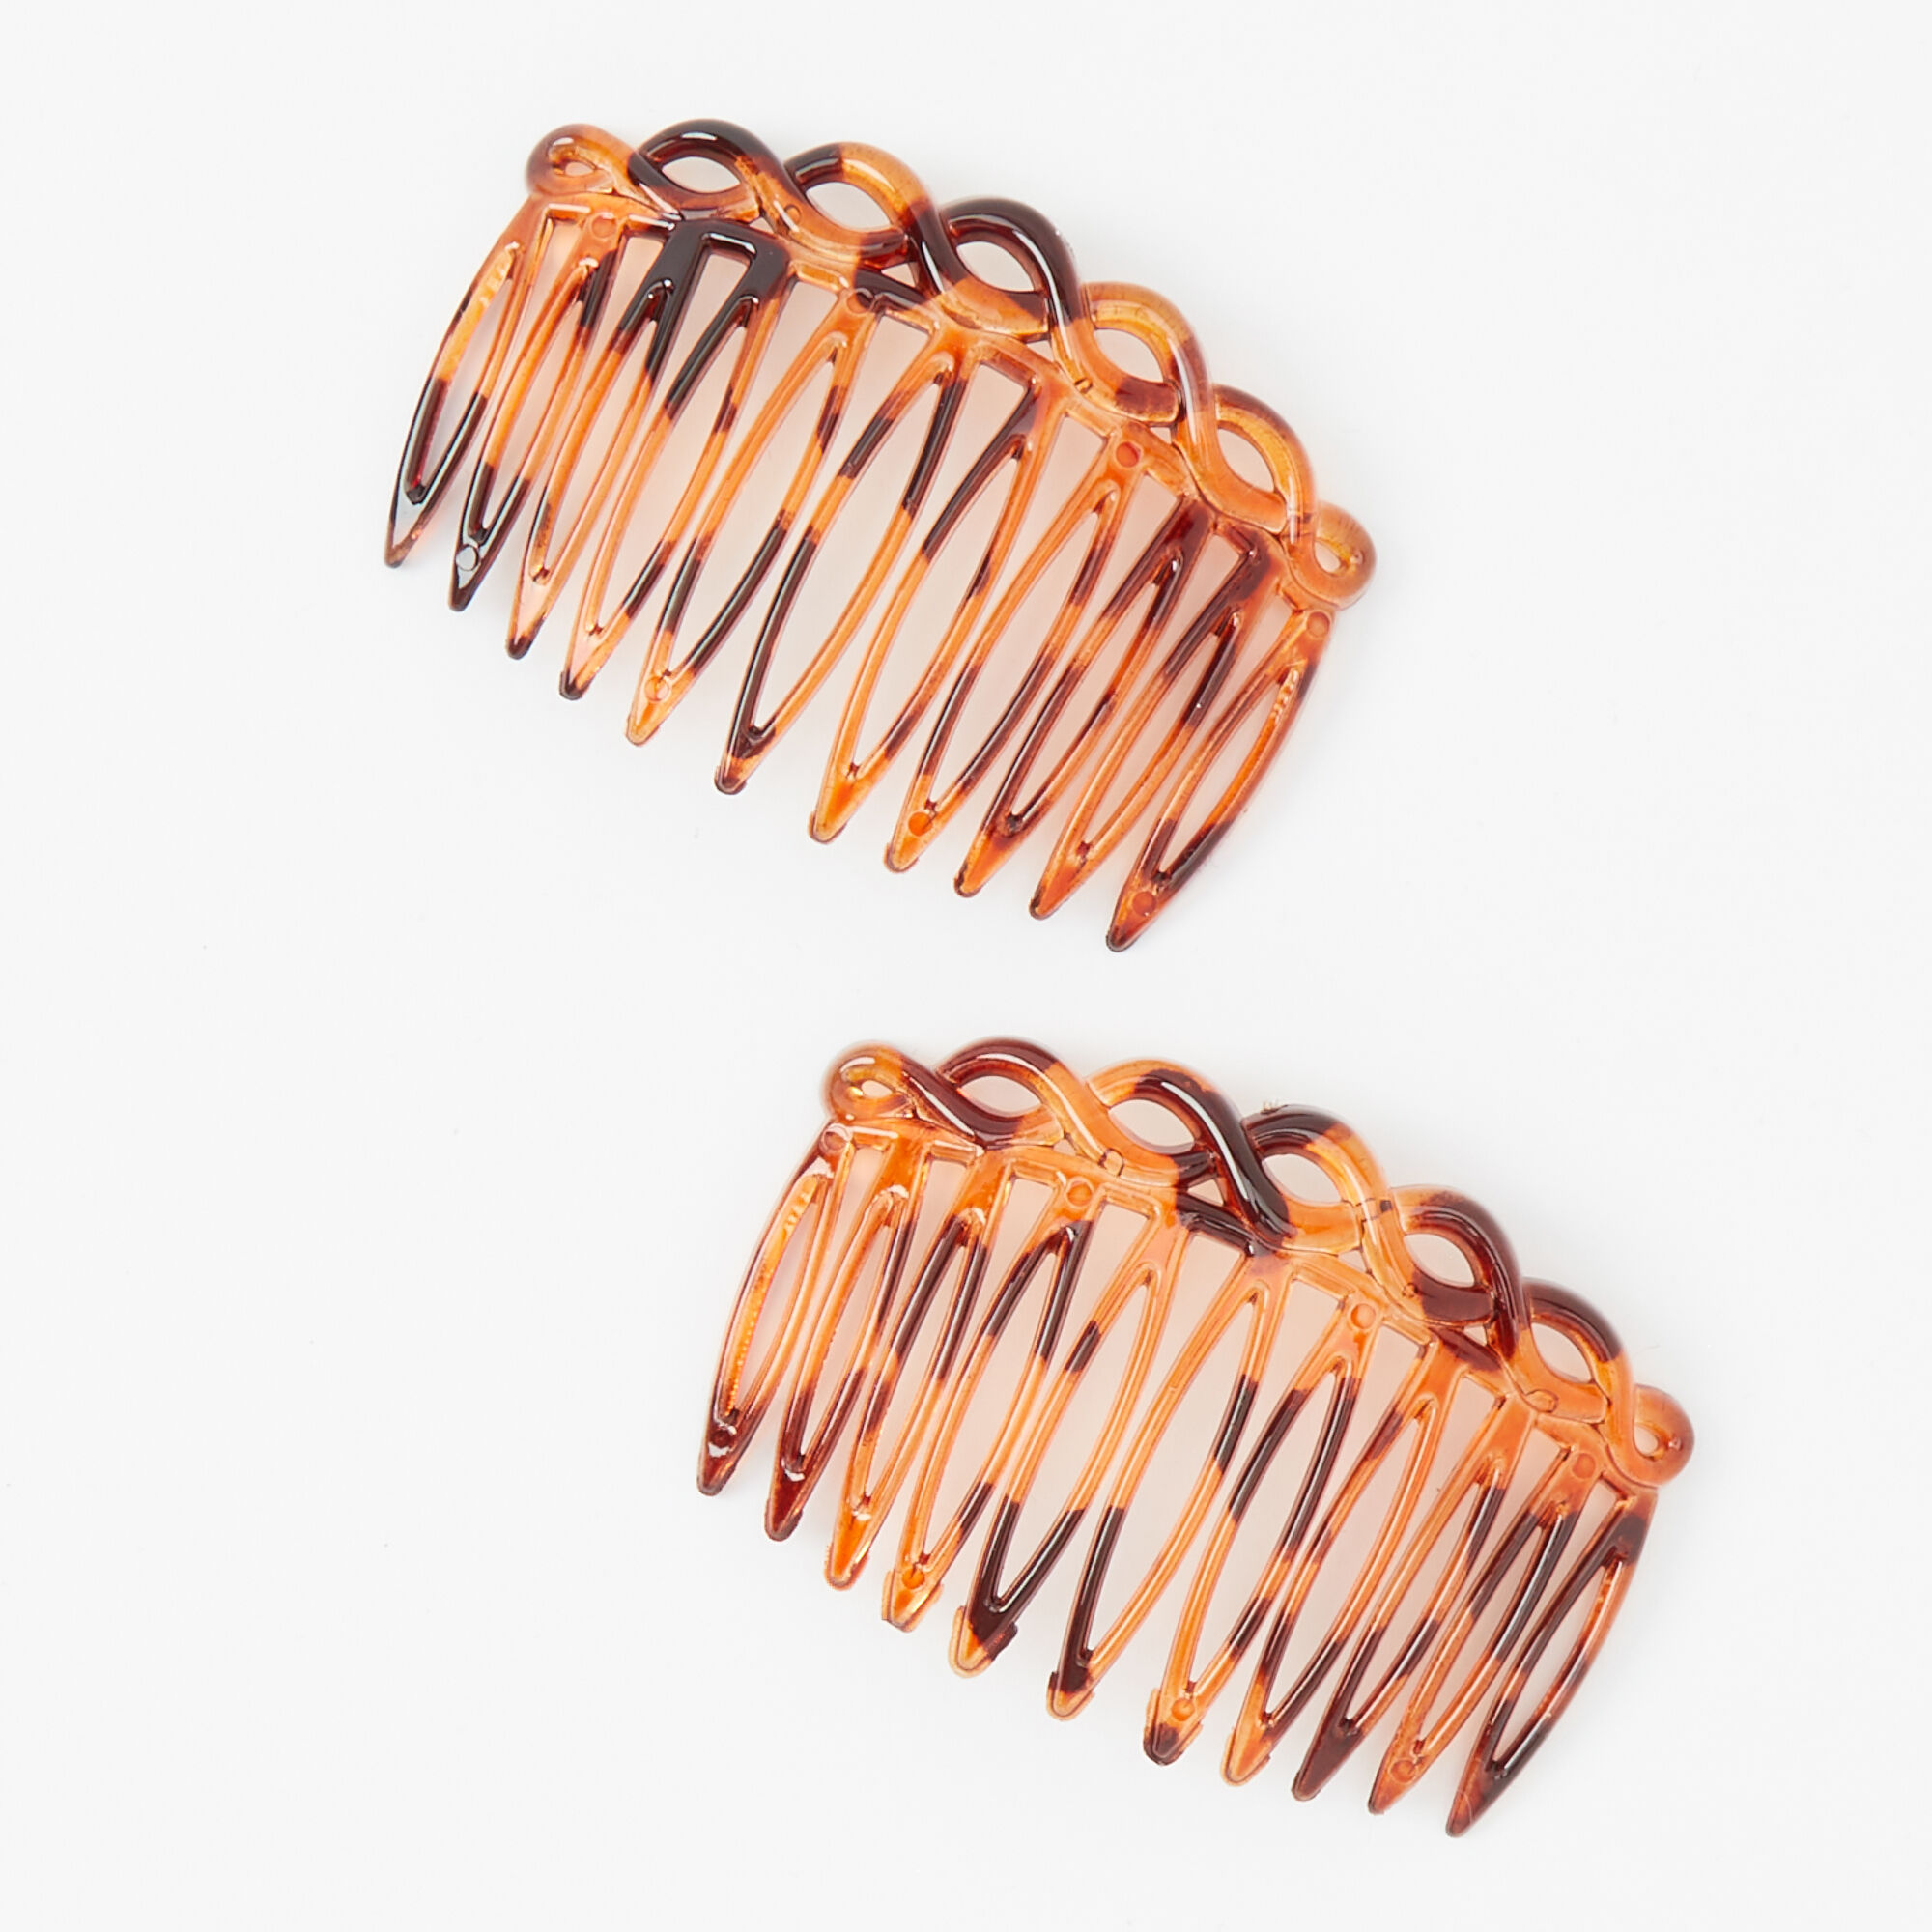 View Claires Filigree Tortoiseshell Hair Combs 2 Pack information